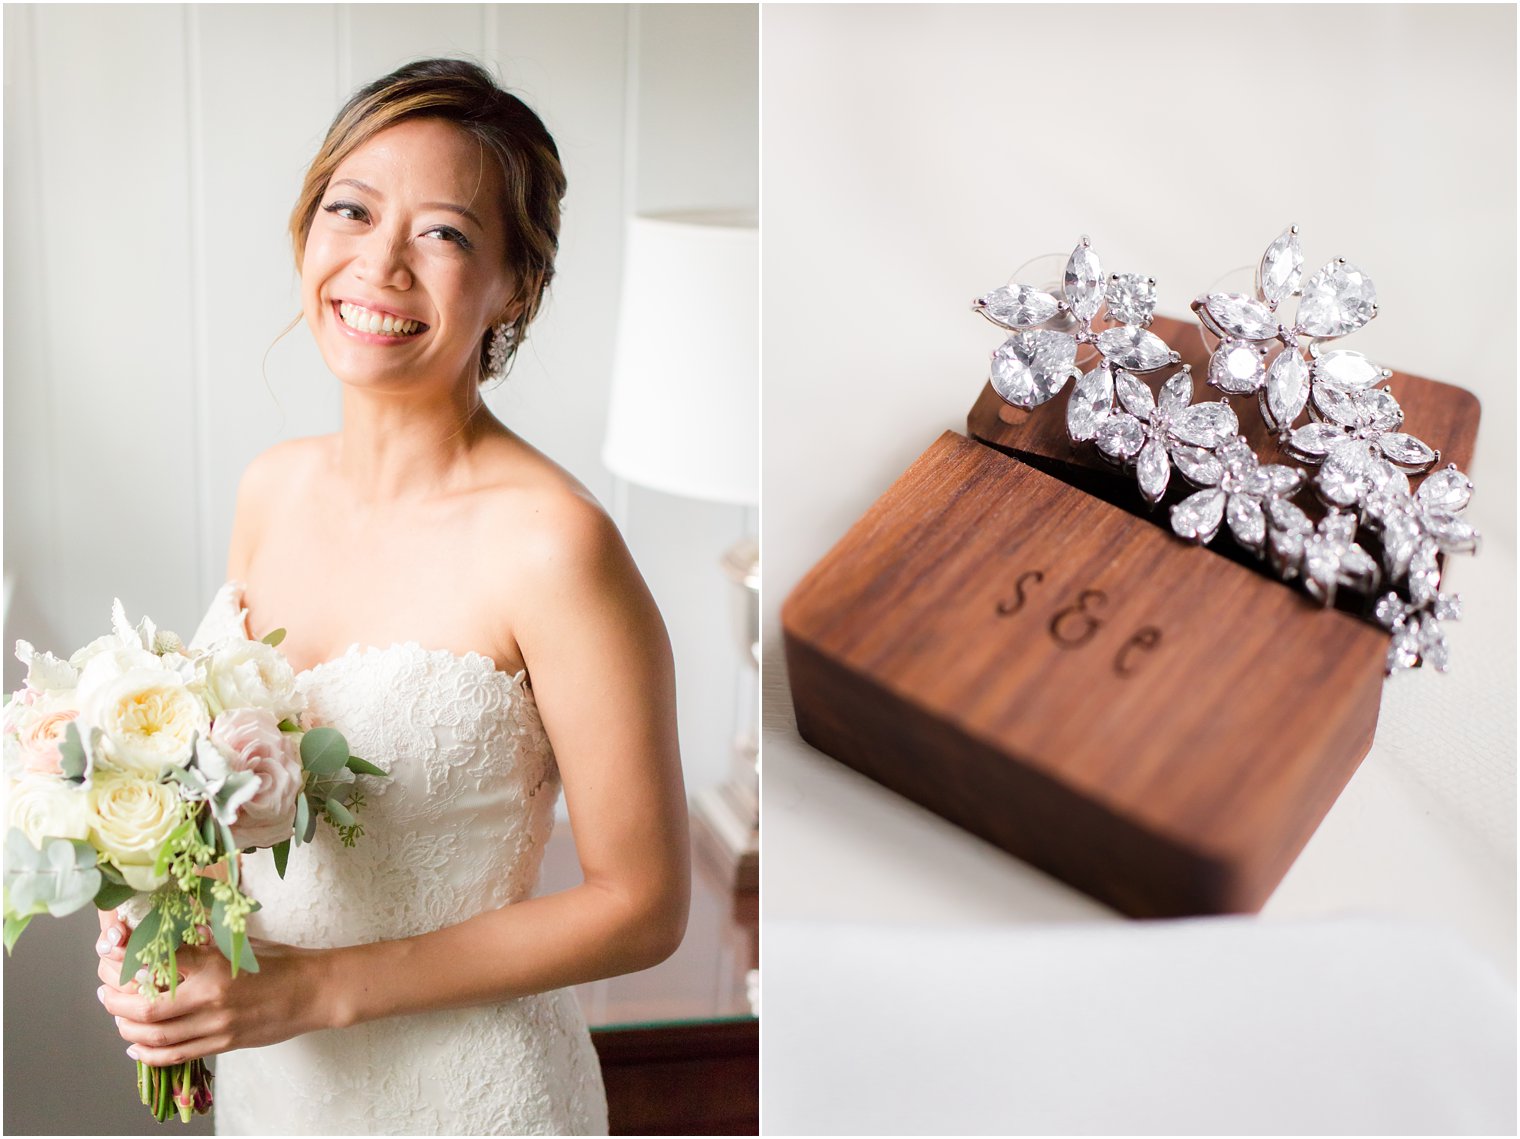 Classic bridal portrait for Chauncey Hotel wedding day photographed by Idalia Photography